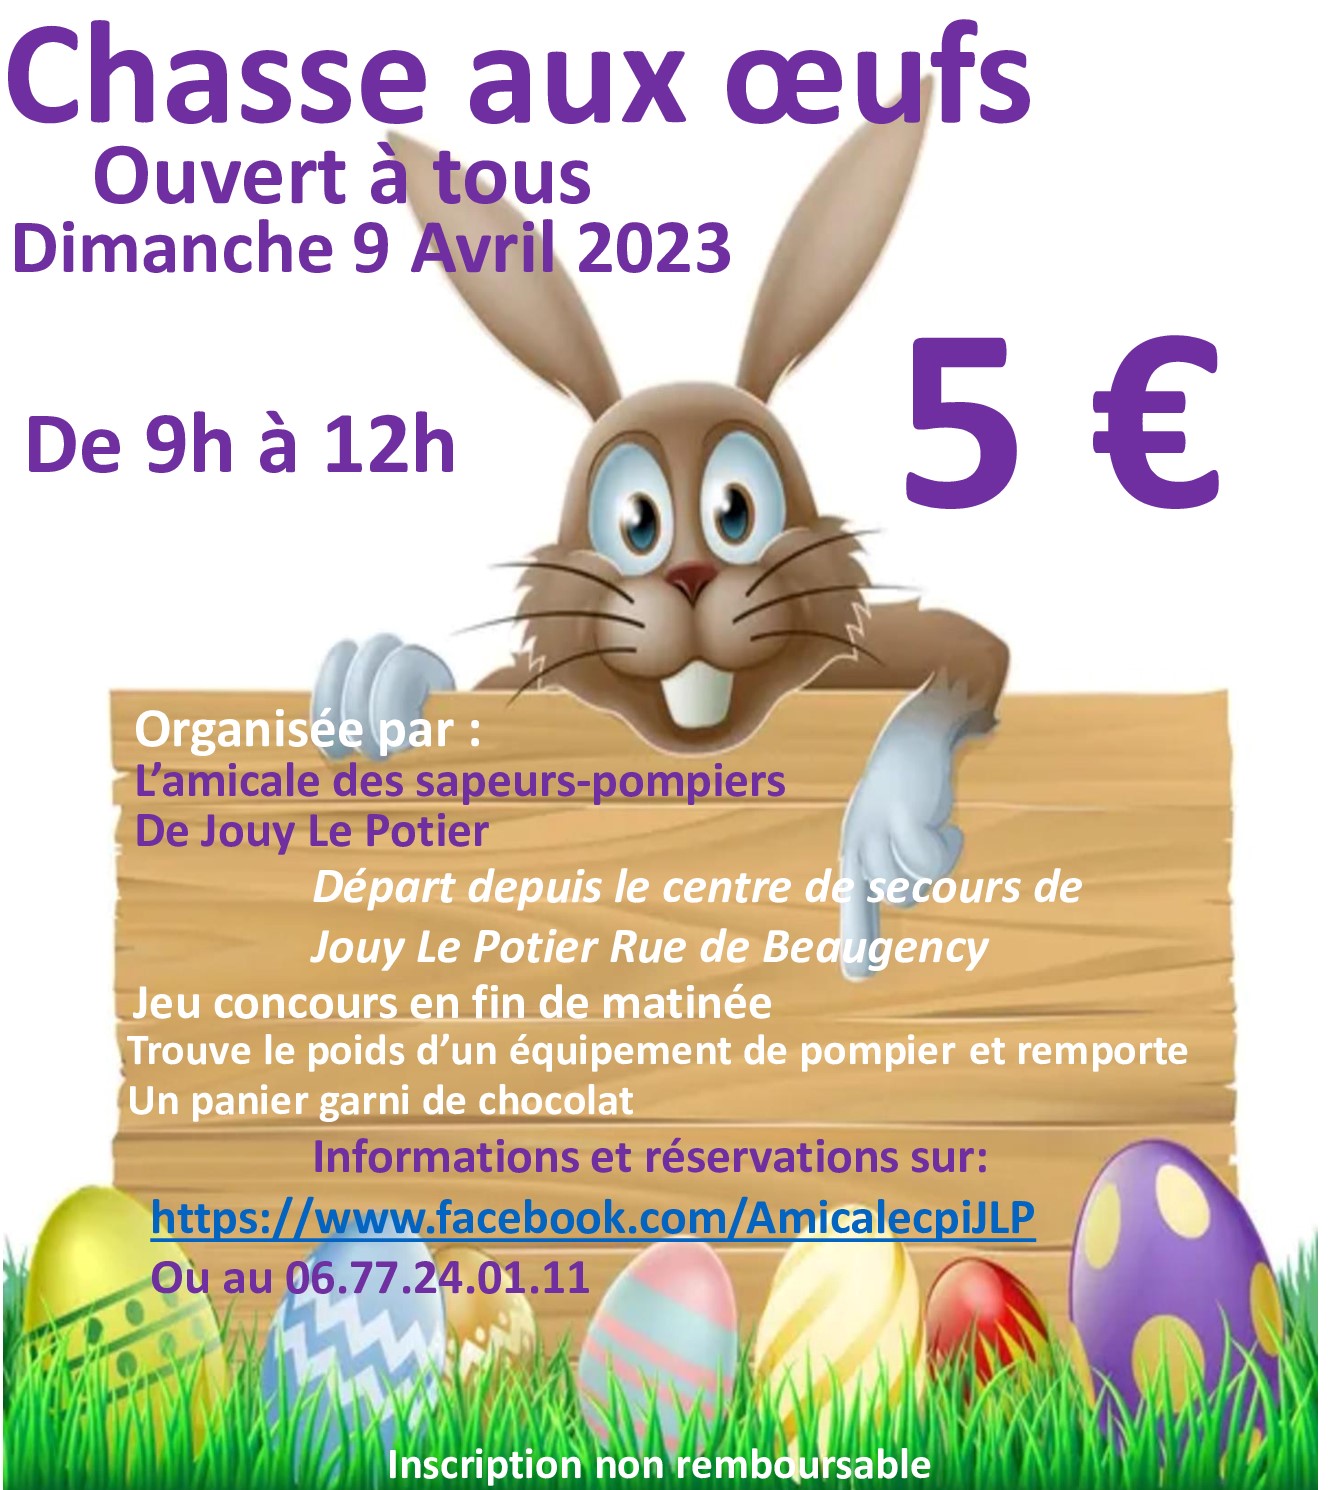 Chasse aux oeufs Jouy 08 04 2023